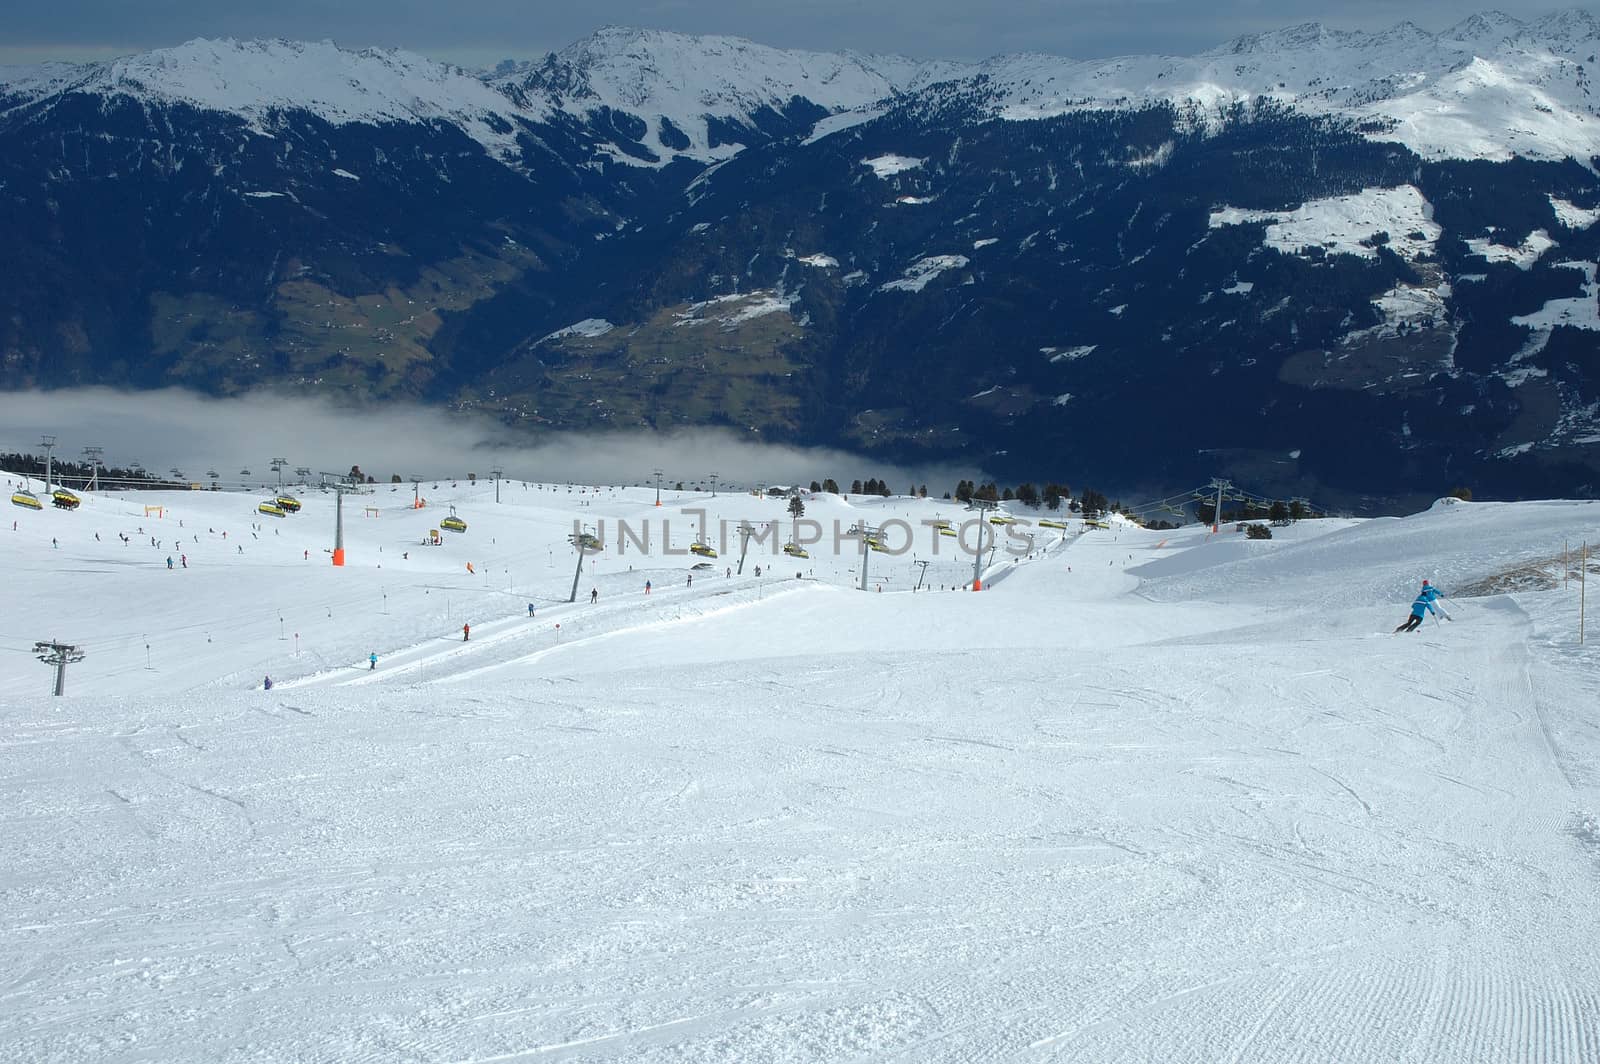 Slope and ski lifts in zillertal valley in Austria